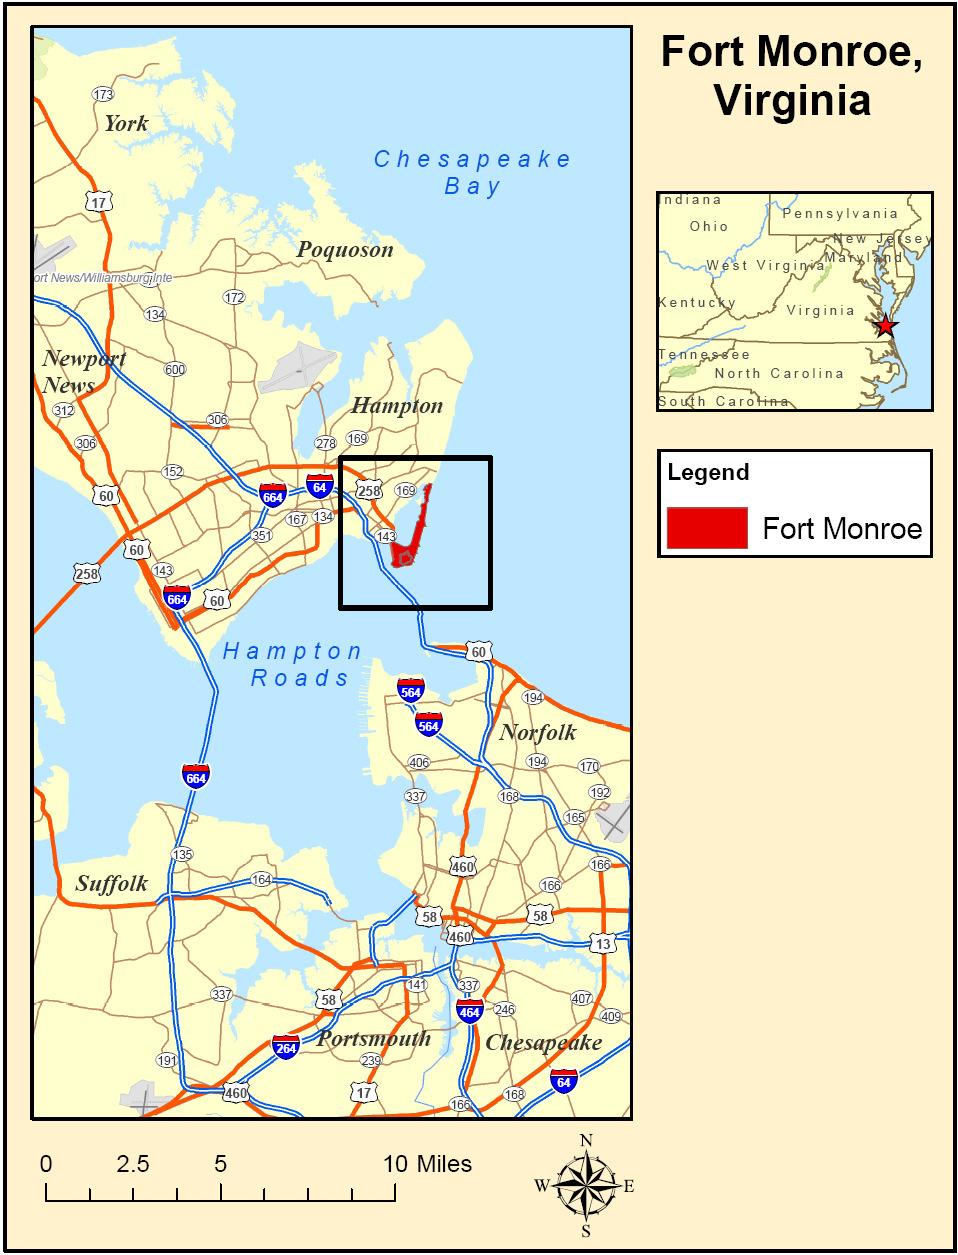 Regional Context Base Closure Process and Timing Pursuant to the 2005 Base Realignment and Closure process, the Department of Defense will leave Fort Monroe on September 15, 2011.